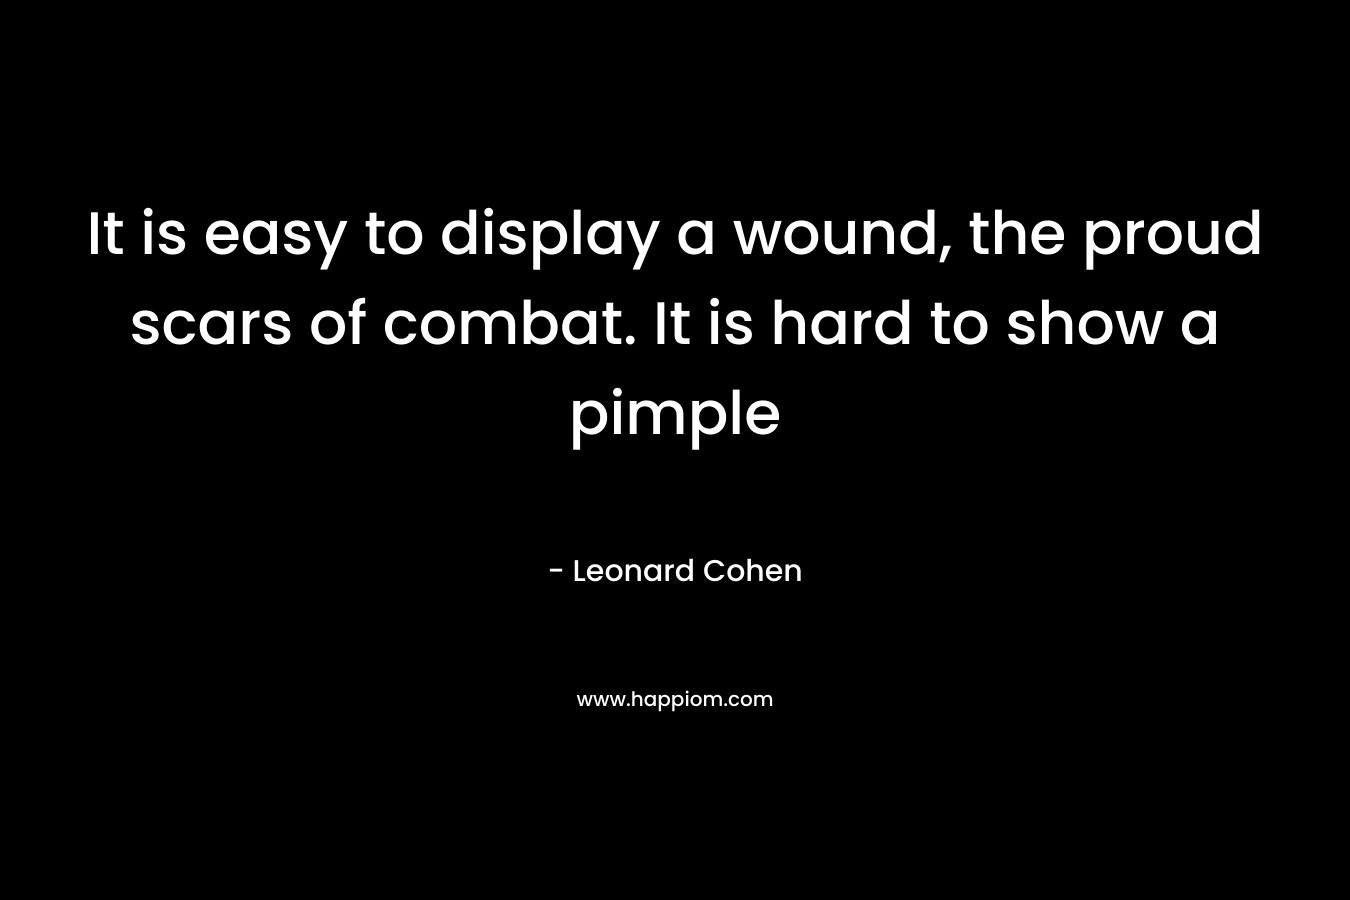 It is easy to display a wound, the proud scars of combat. It is hard to show a pimple – Leonard Cohen